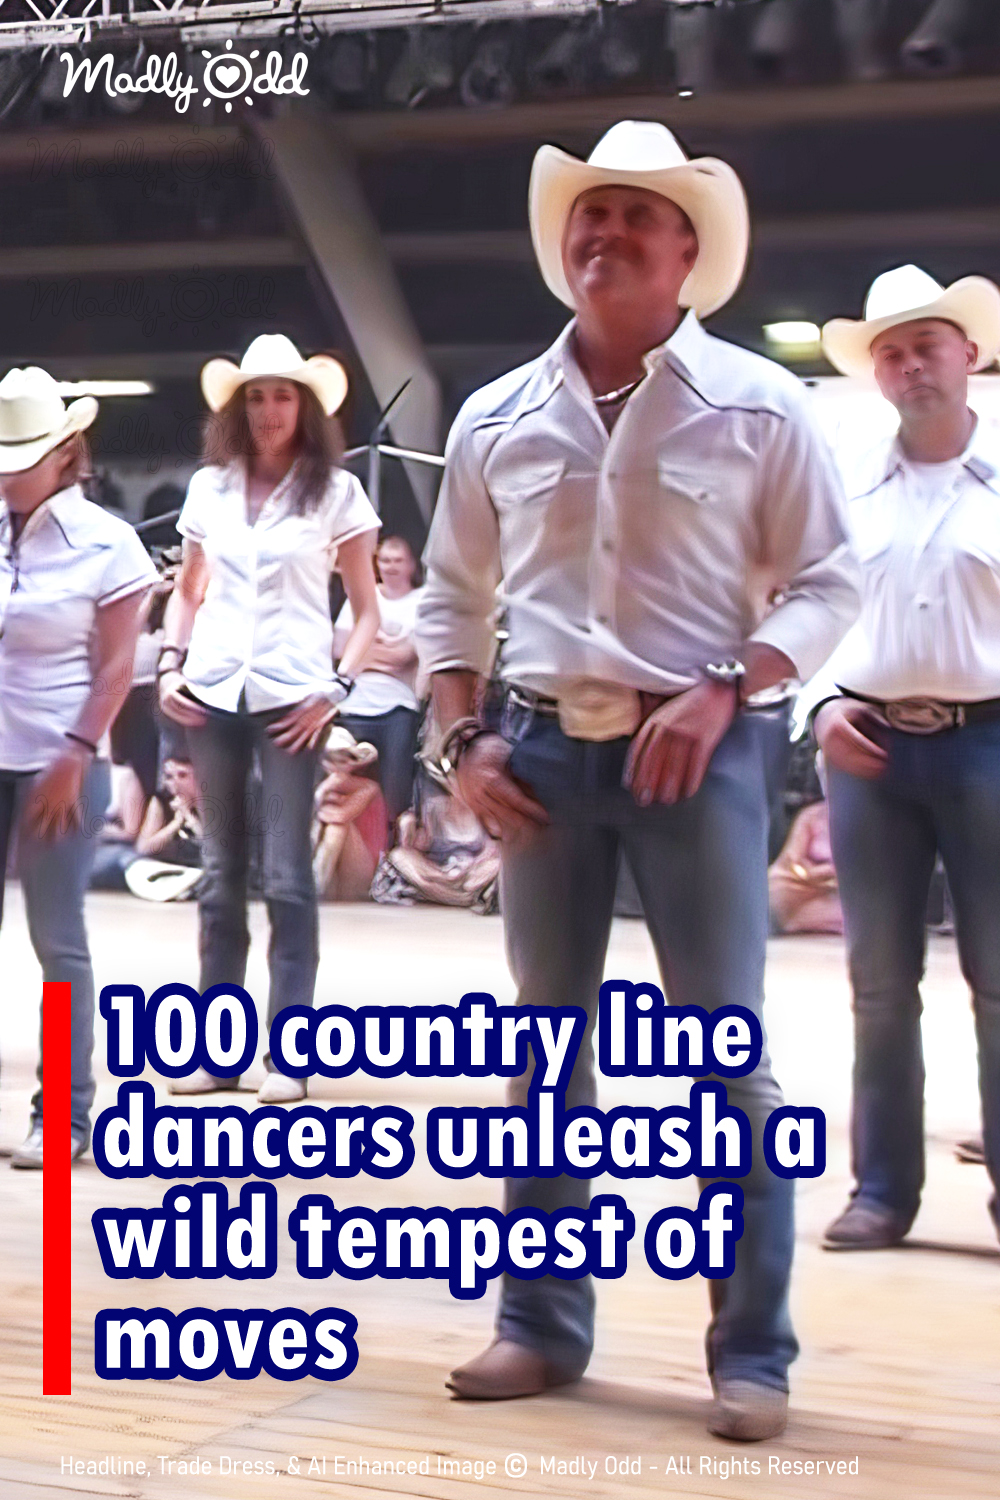 One hundred country line dancers unleash wild tempest of rollicking moves